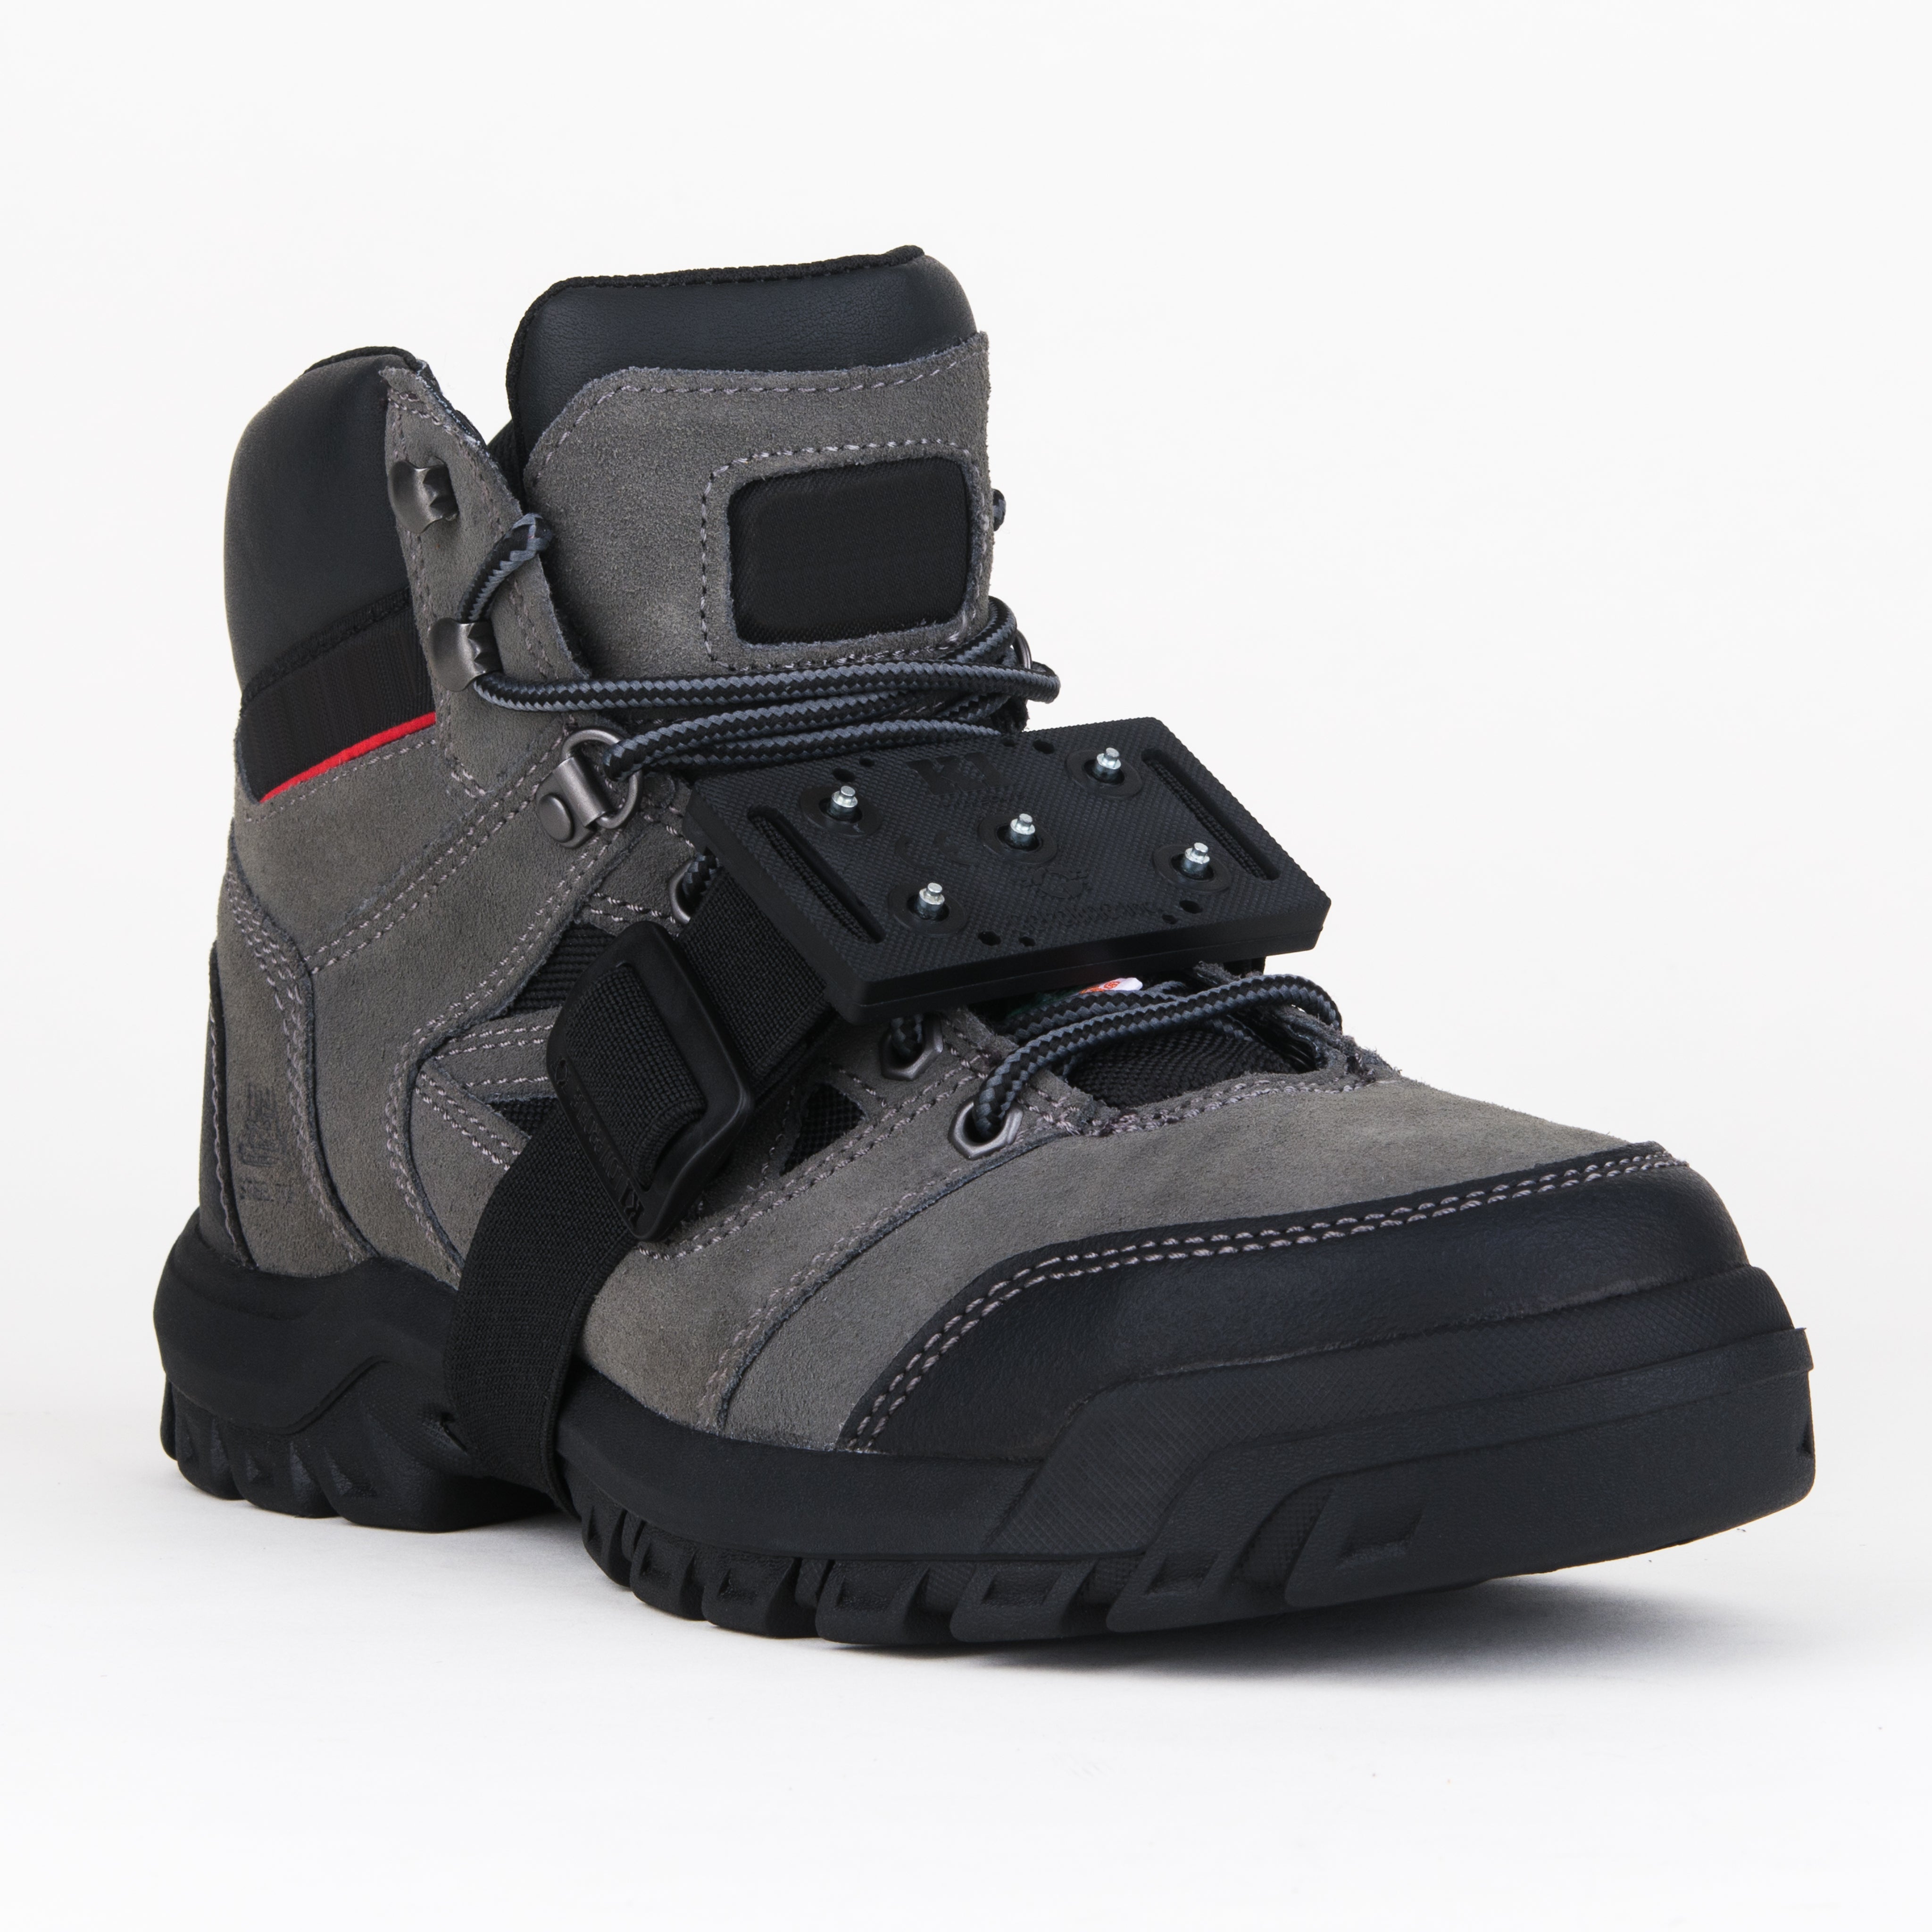 K1 Series Mid-Sole Low Profile Ice Cleat (For Work Boots & Safety Shoes) Work Boots - Cleanflow